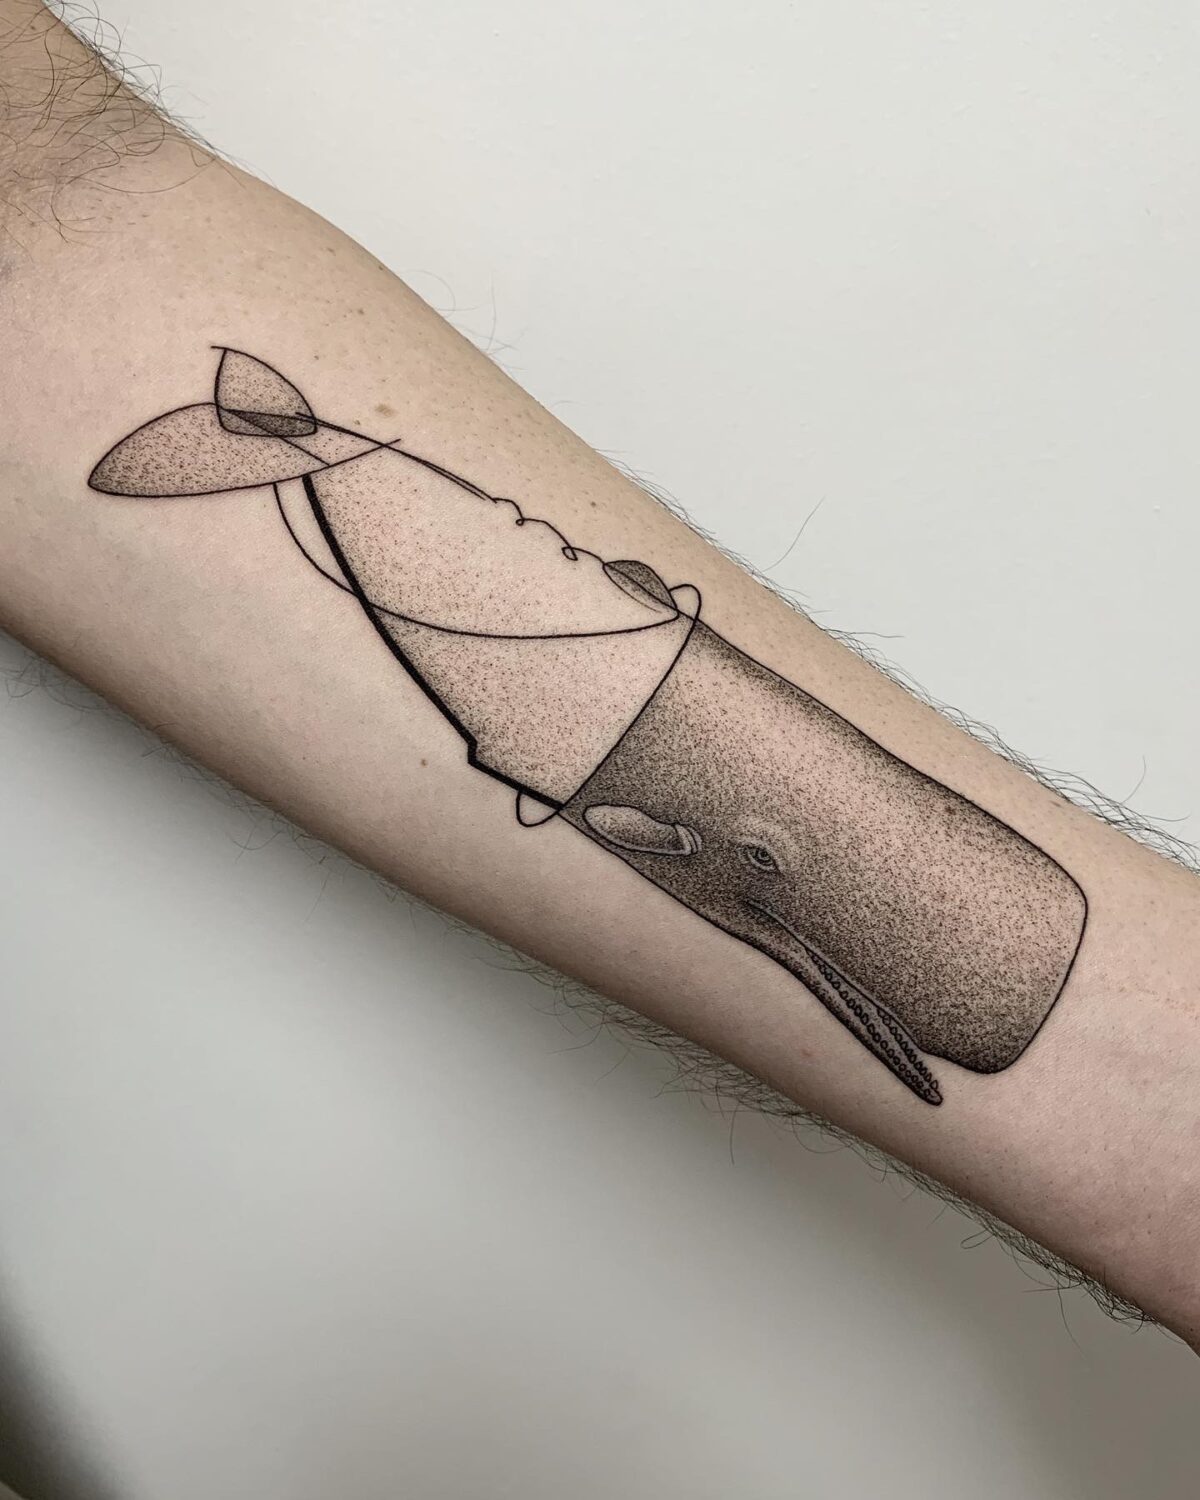 Whimsical Vintage Science Book Inspired Tattoos By Michele Volpi 10